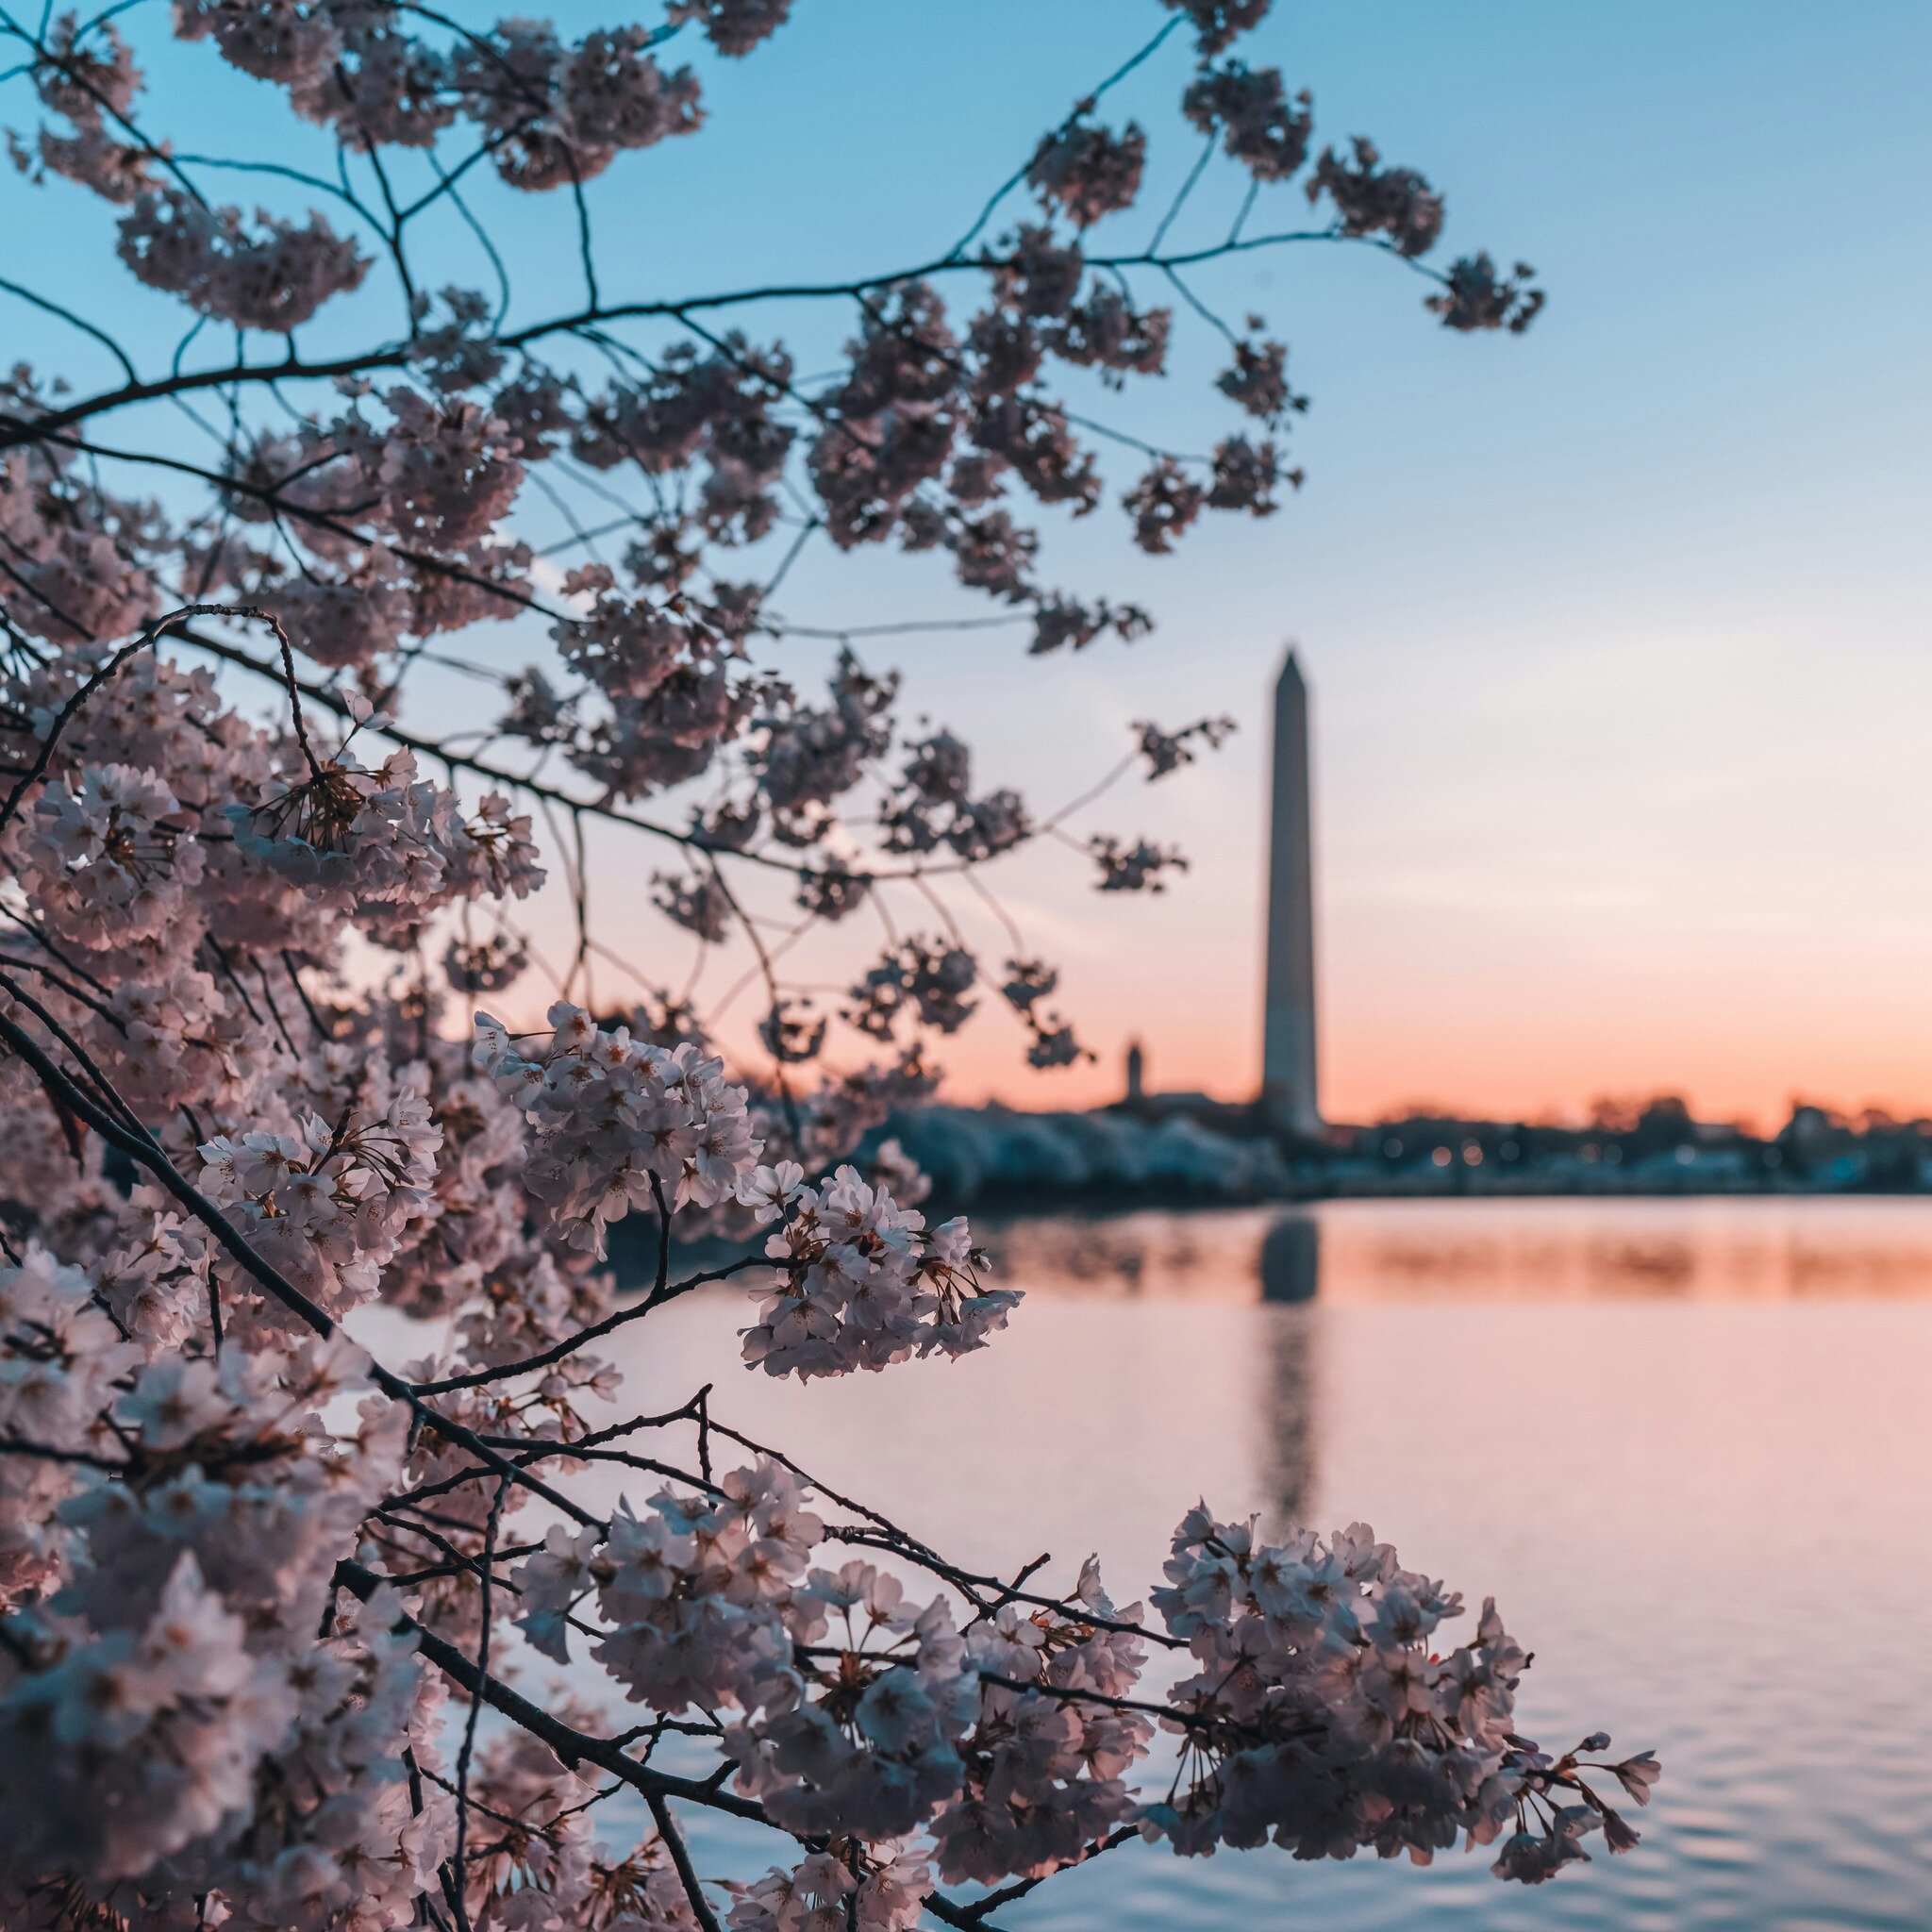 Cherry blossom season is almost upon us! Peak viewing dates are going to be March 23rd - 26th. Are you planning to get out and see them?🌸

#resessential #residentevents #liveauthentic #experientialmarketing #apartmentliving #amenityspaces #amenities